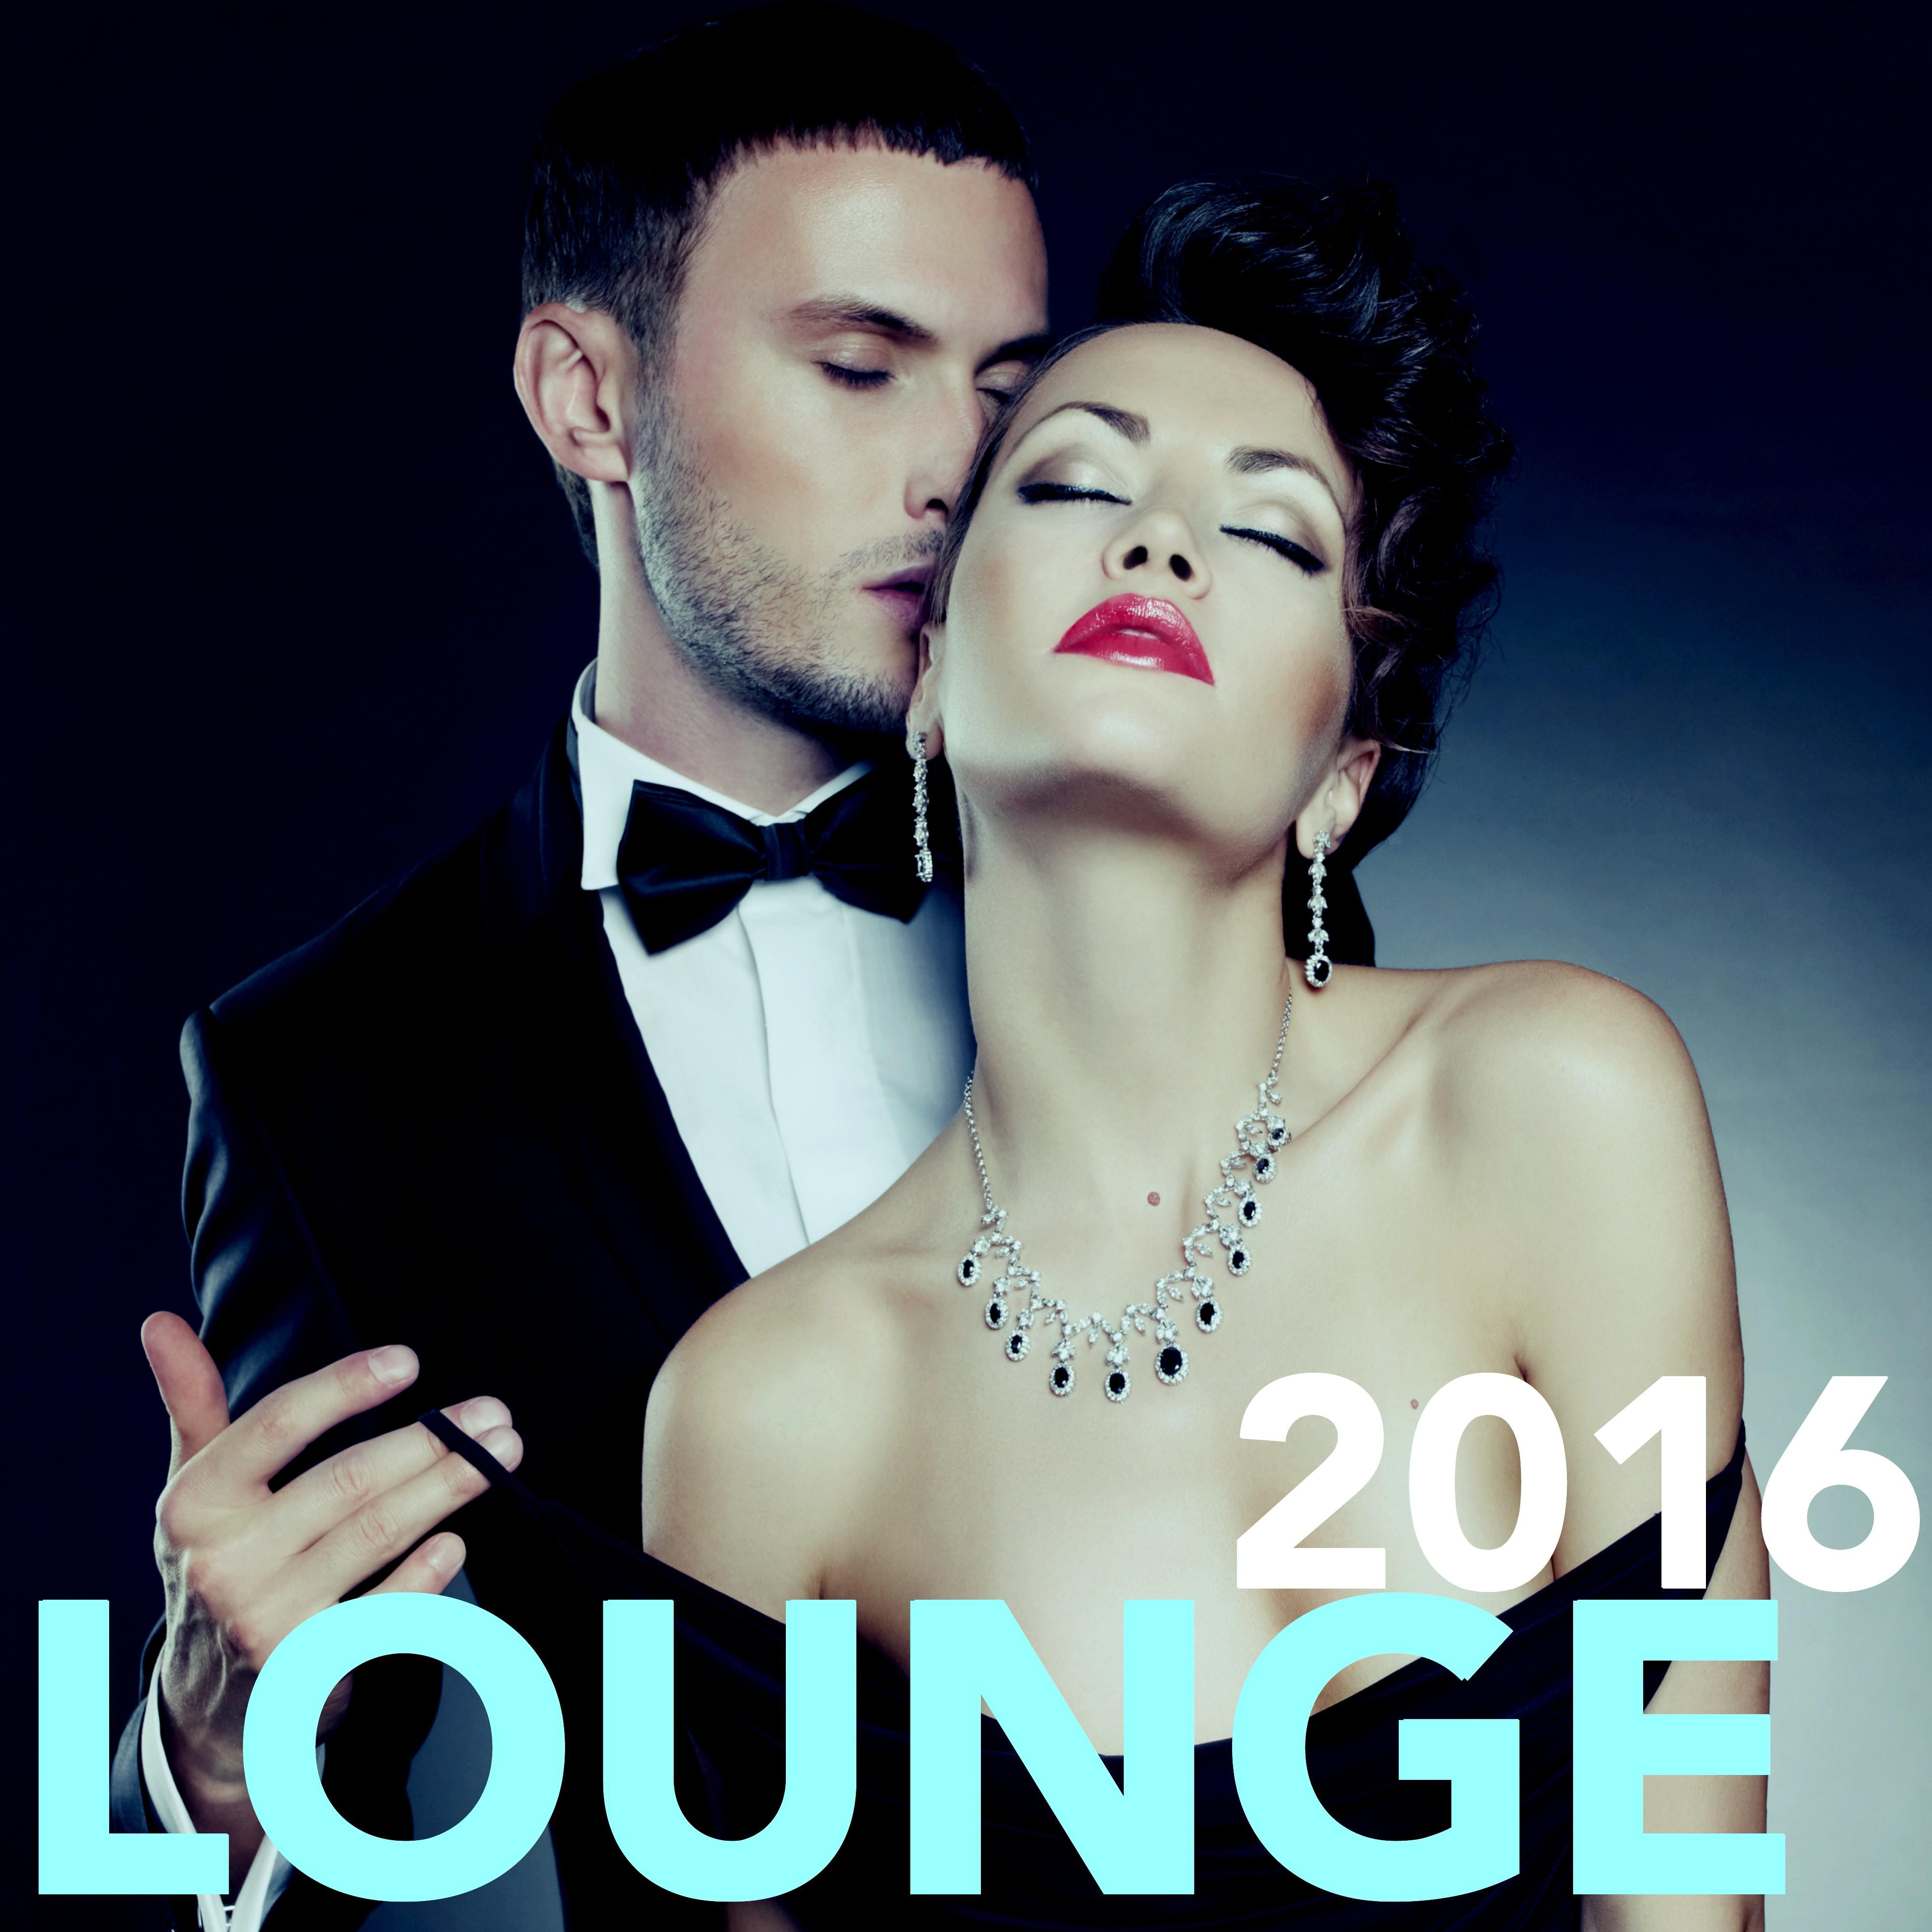 Lounge 2016 - Lounge Music Collection Summer 2016, Beach Cocktail Party Night